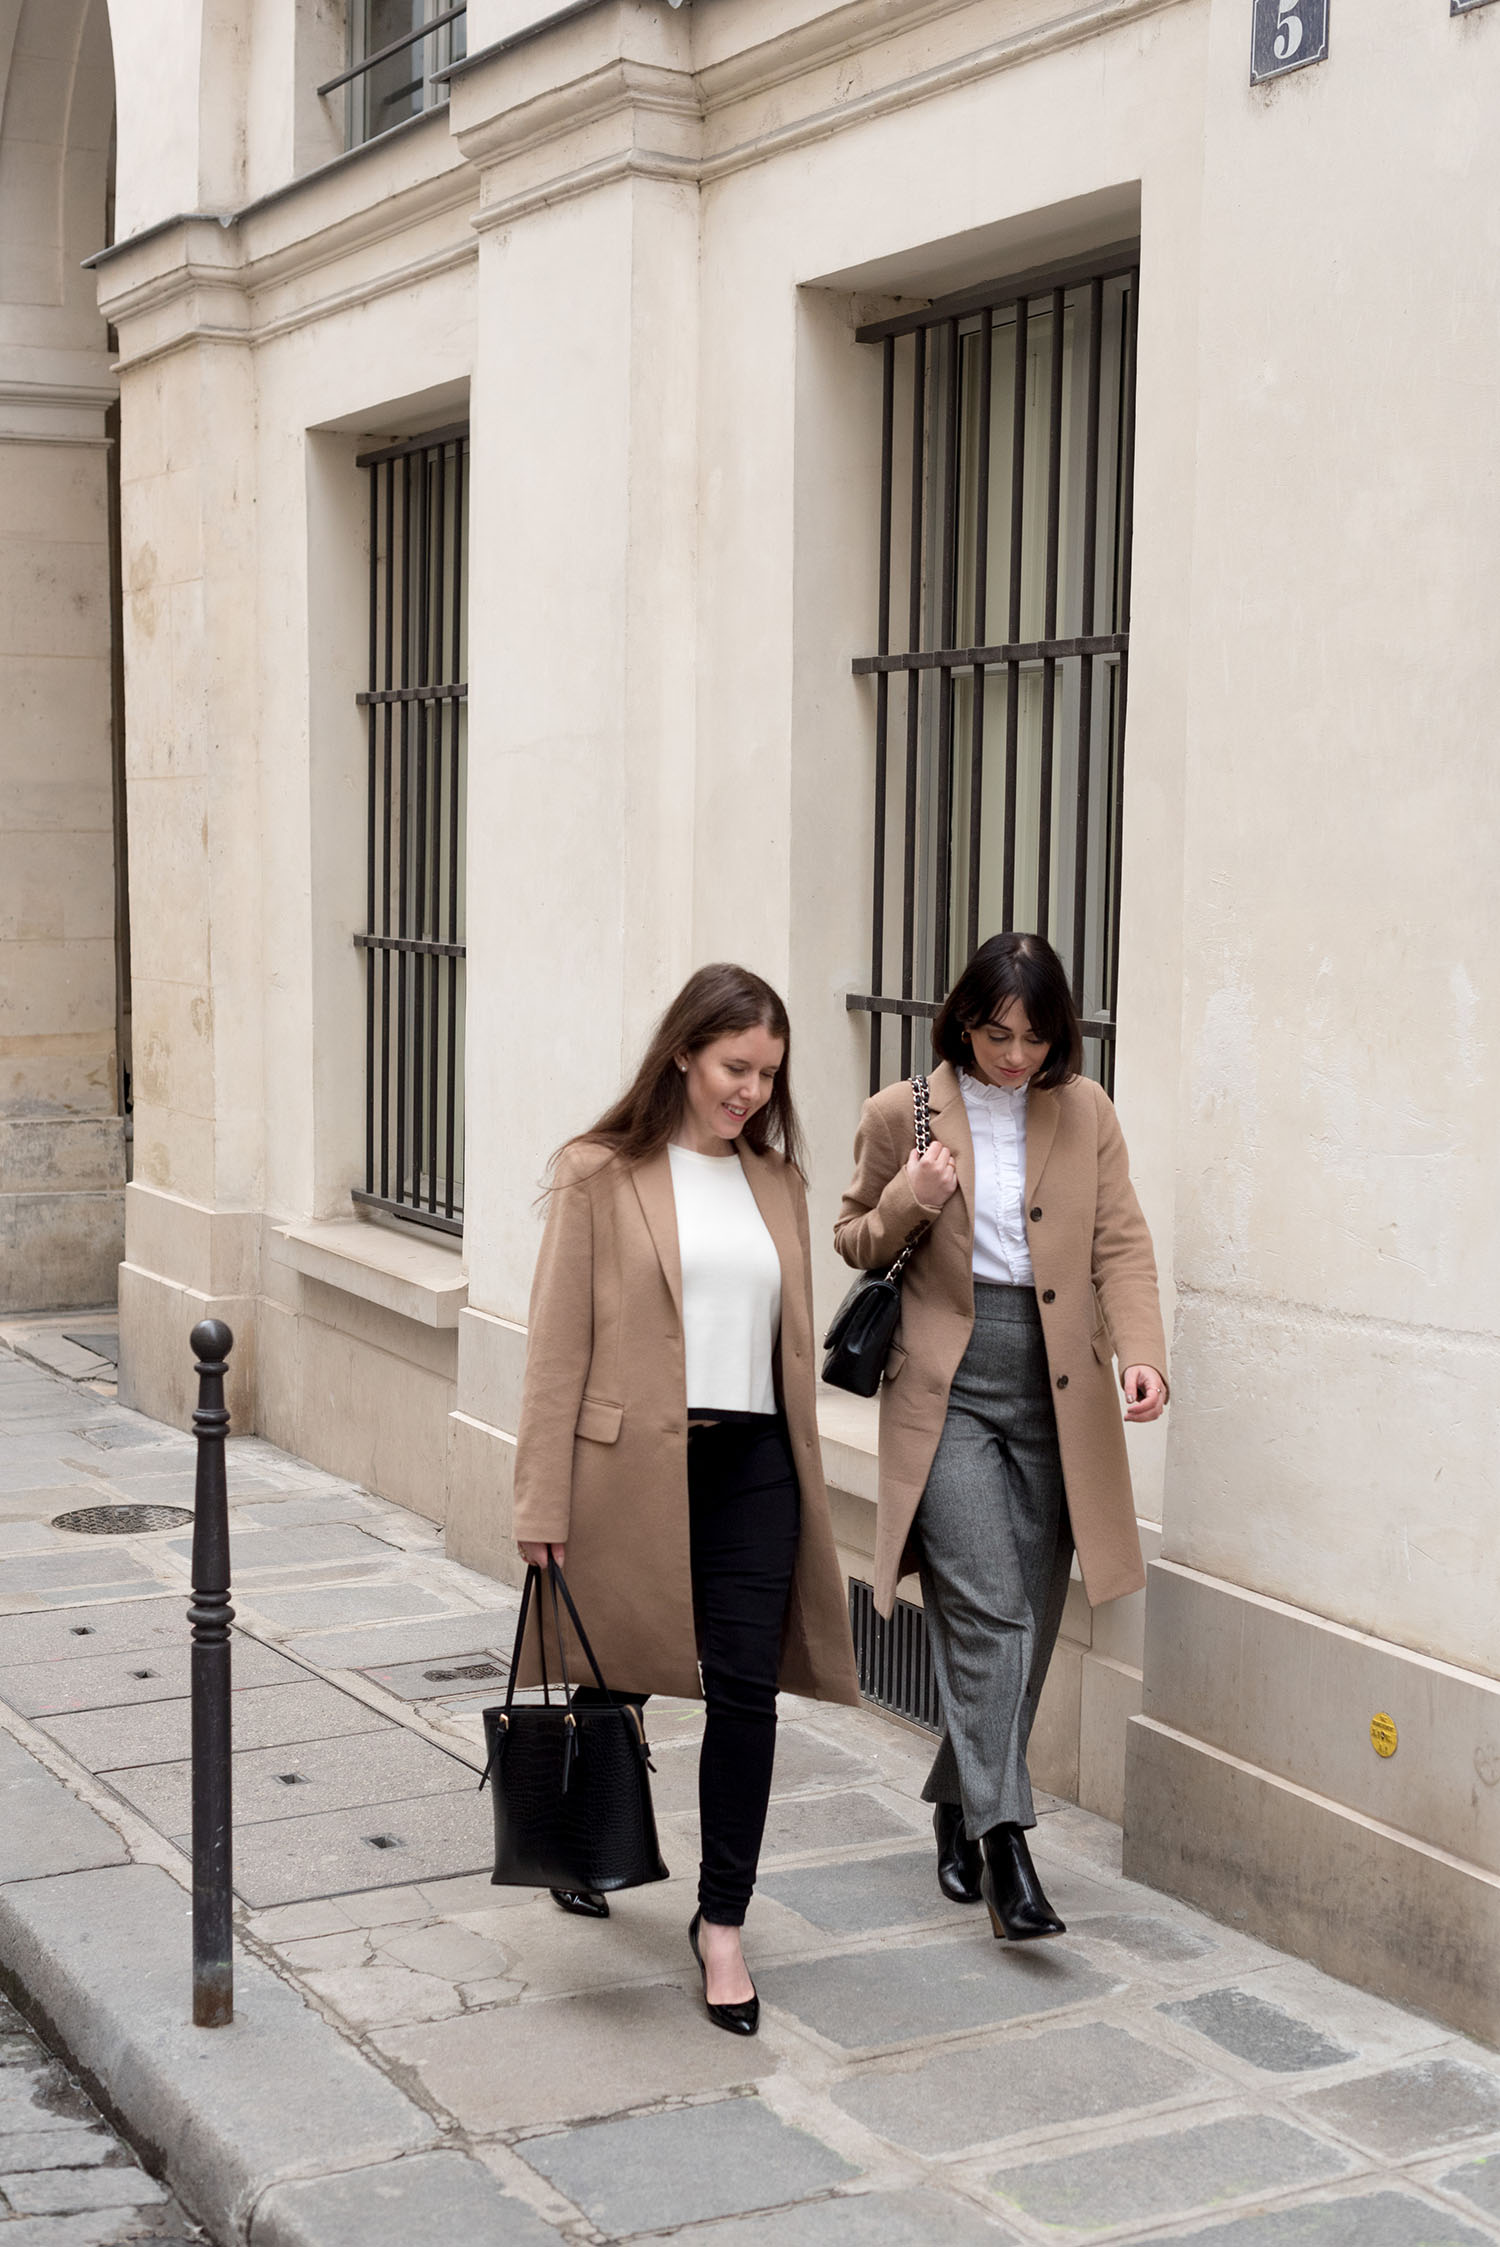 Top Canadian fashion bloggers Cee Fardoe of Coco & Vera and Lyndi Barrett of Style calling at the Palais-Royal in Paris, wearing Uniqlo camel coats